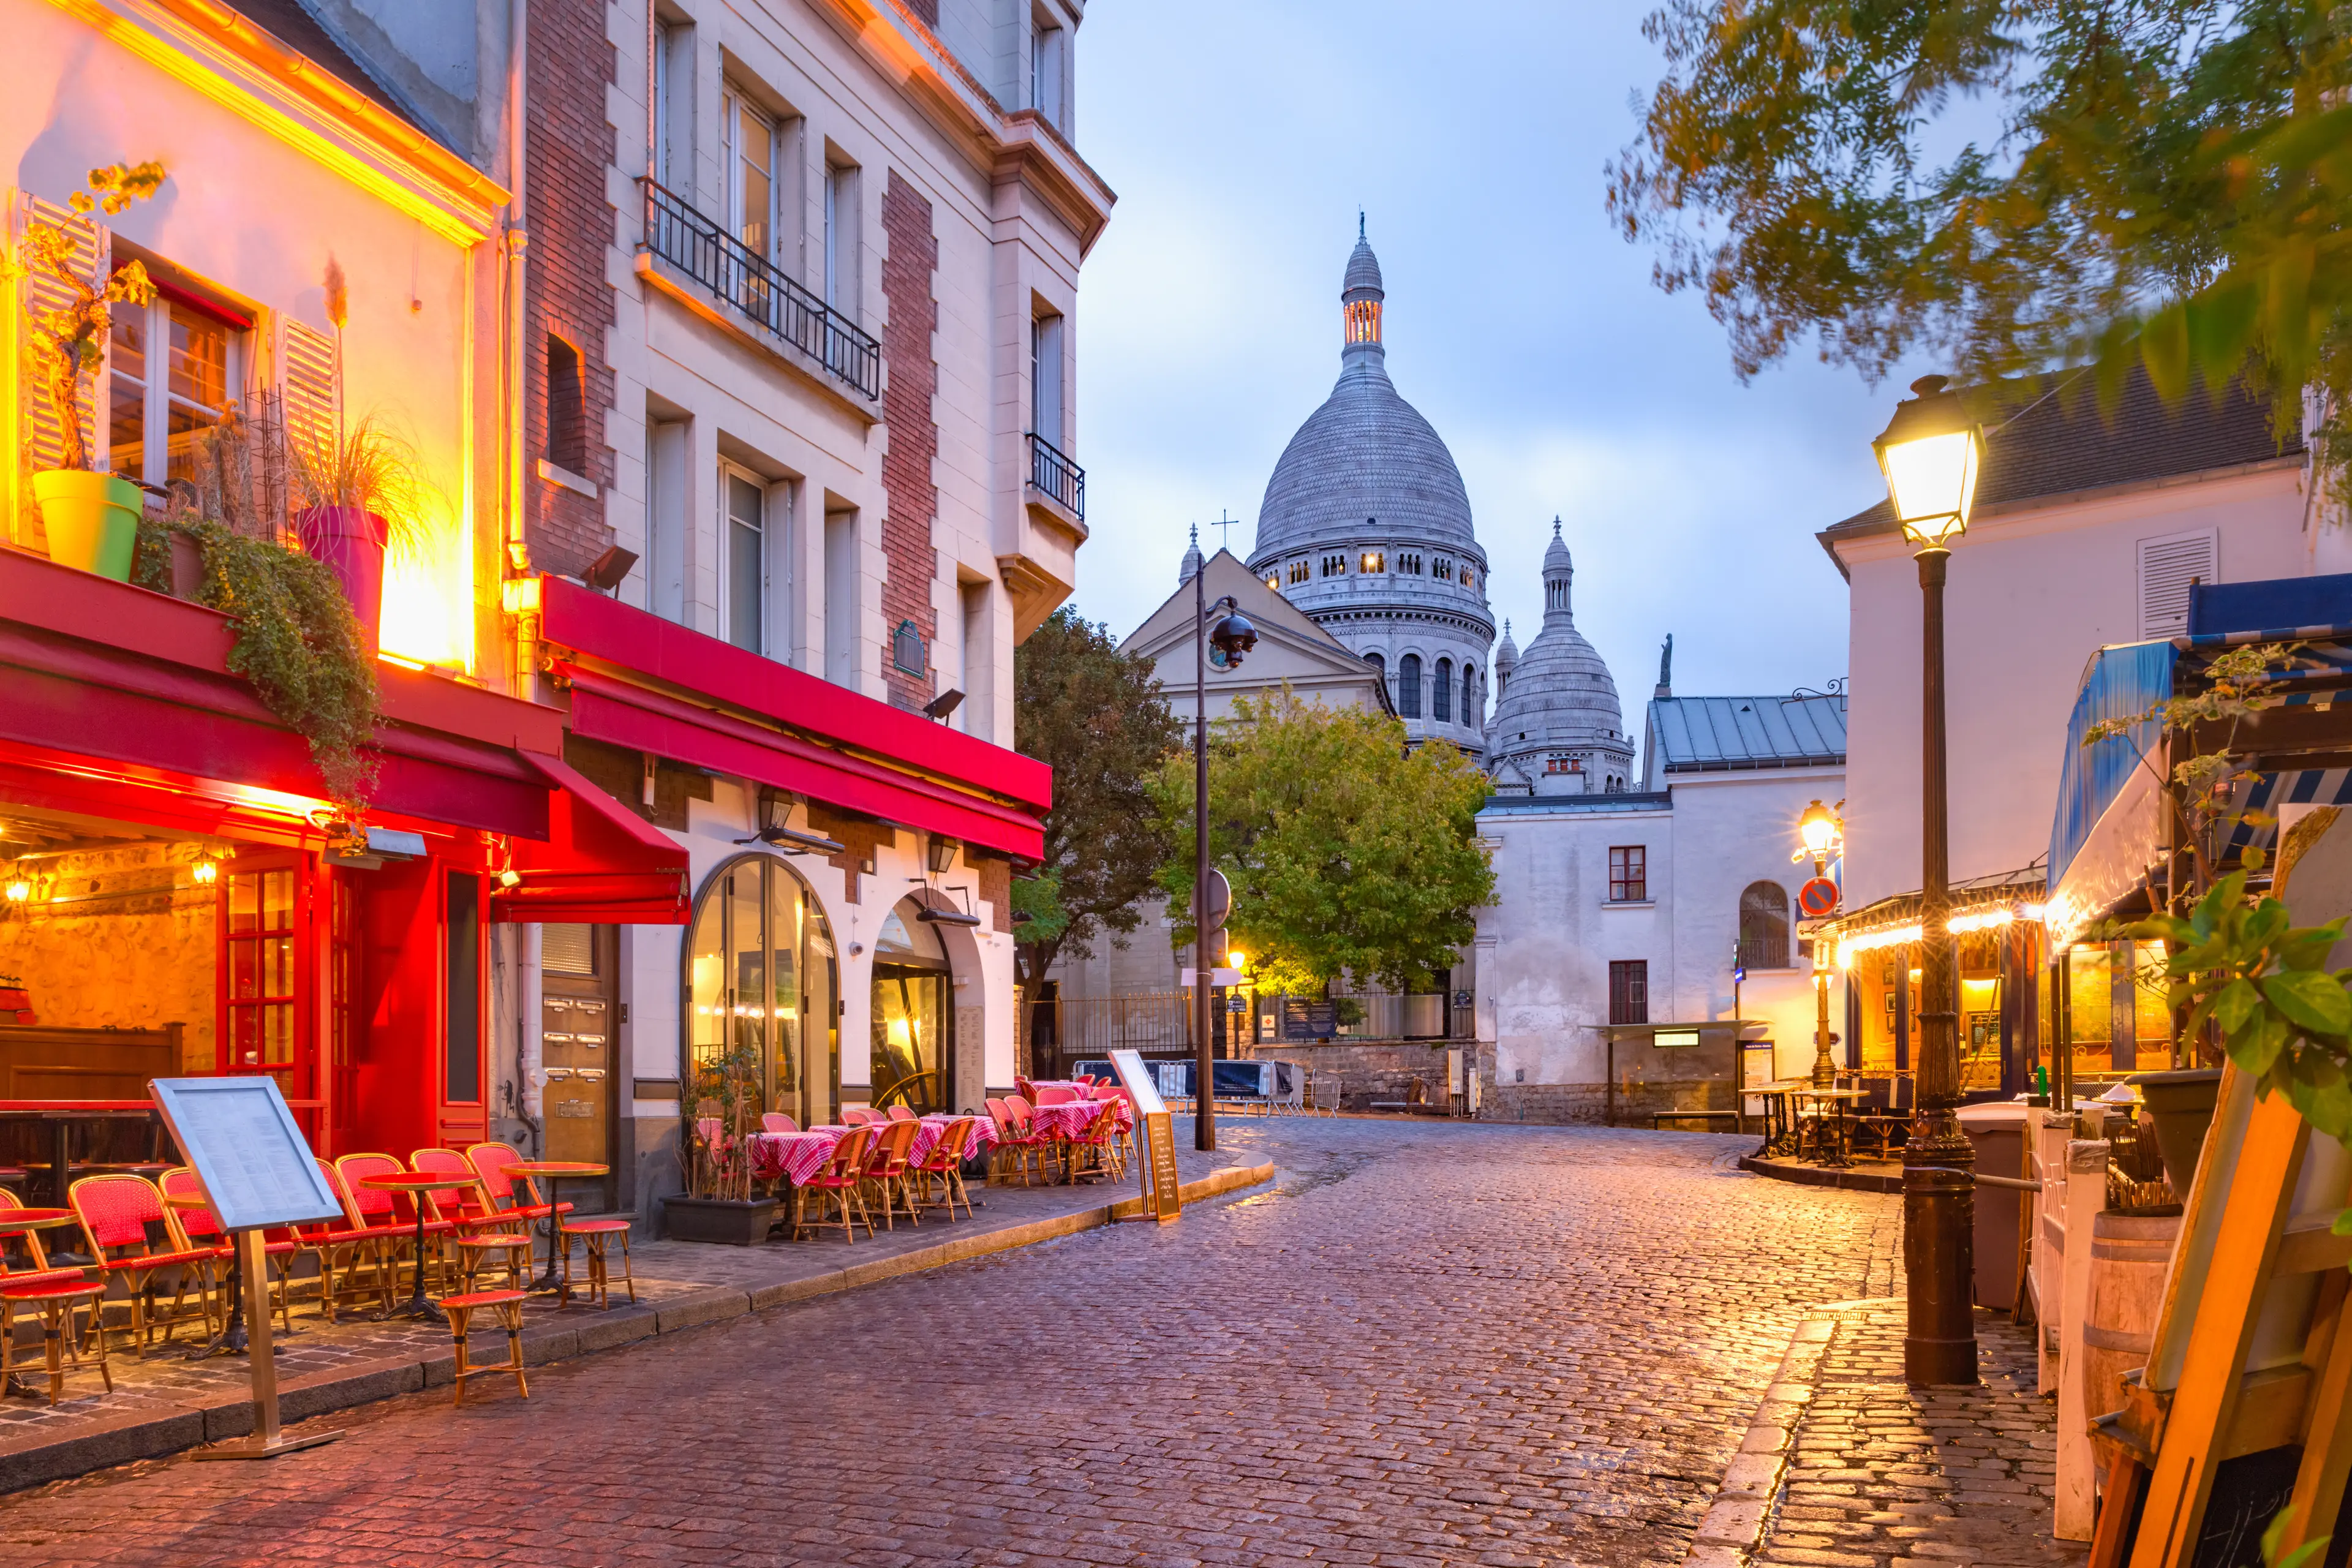 Relaxing 1-Day Outdoor Family Adventure in Paris for Locals